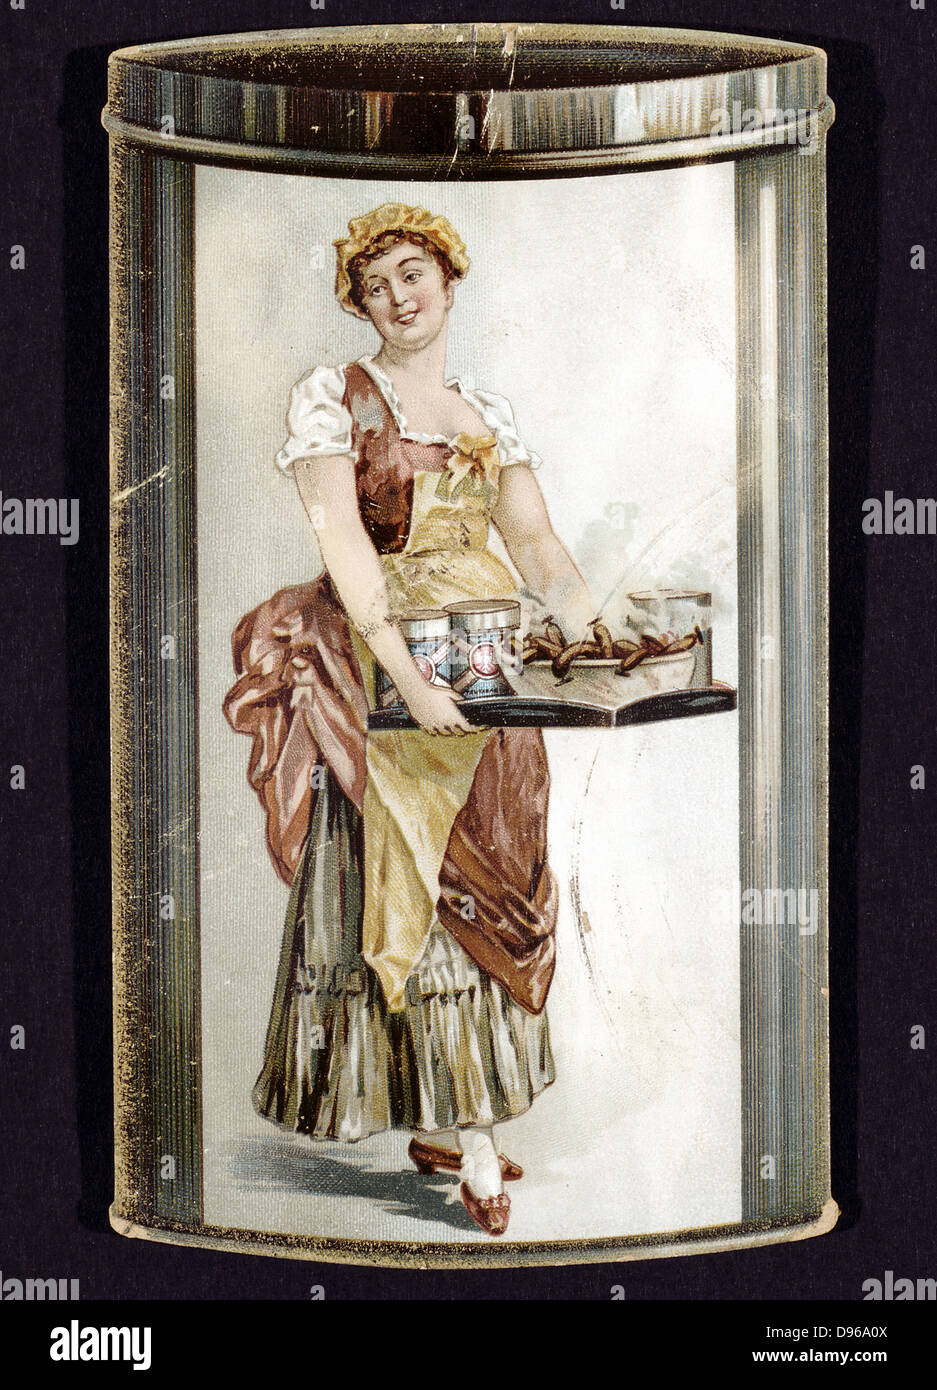 Reverse of trade card for tinned Frankfurters produced by Heinrich Bauer of Frankfurt am Main c1895, showing smiling girl with tray of steaming sausages. Stock Photo